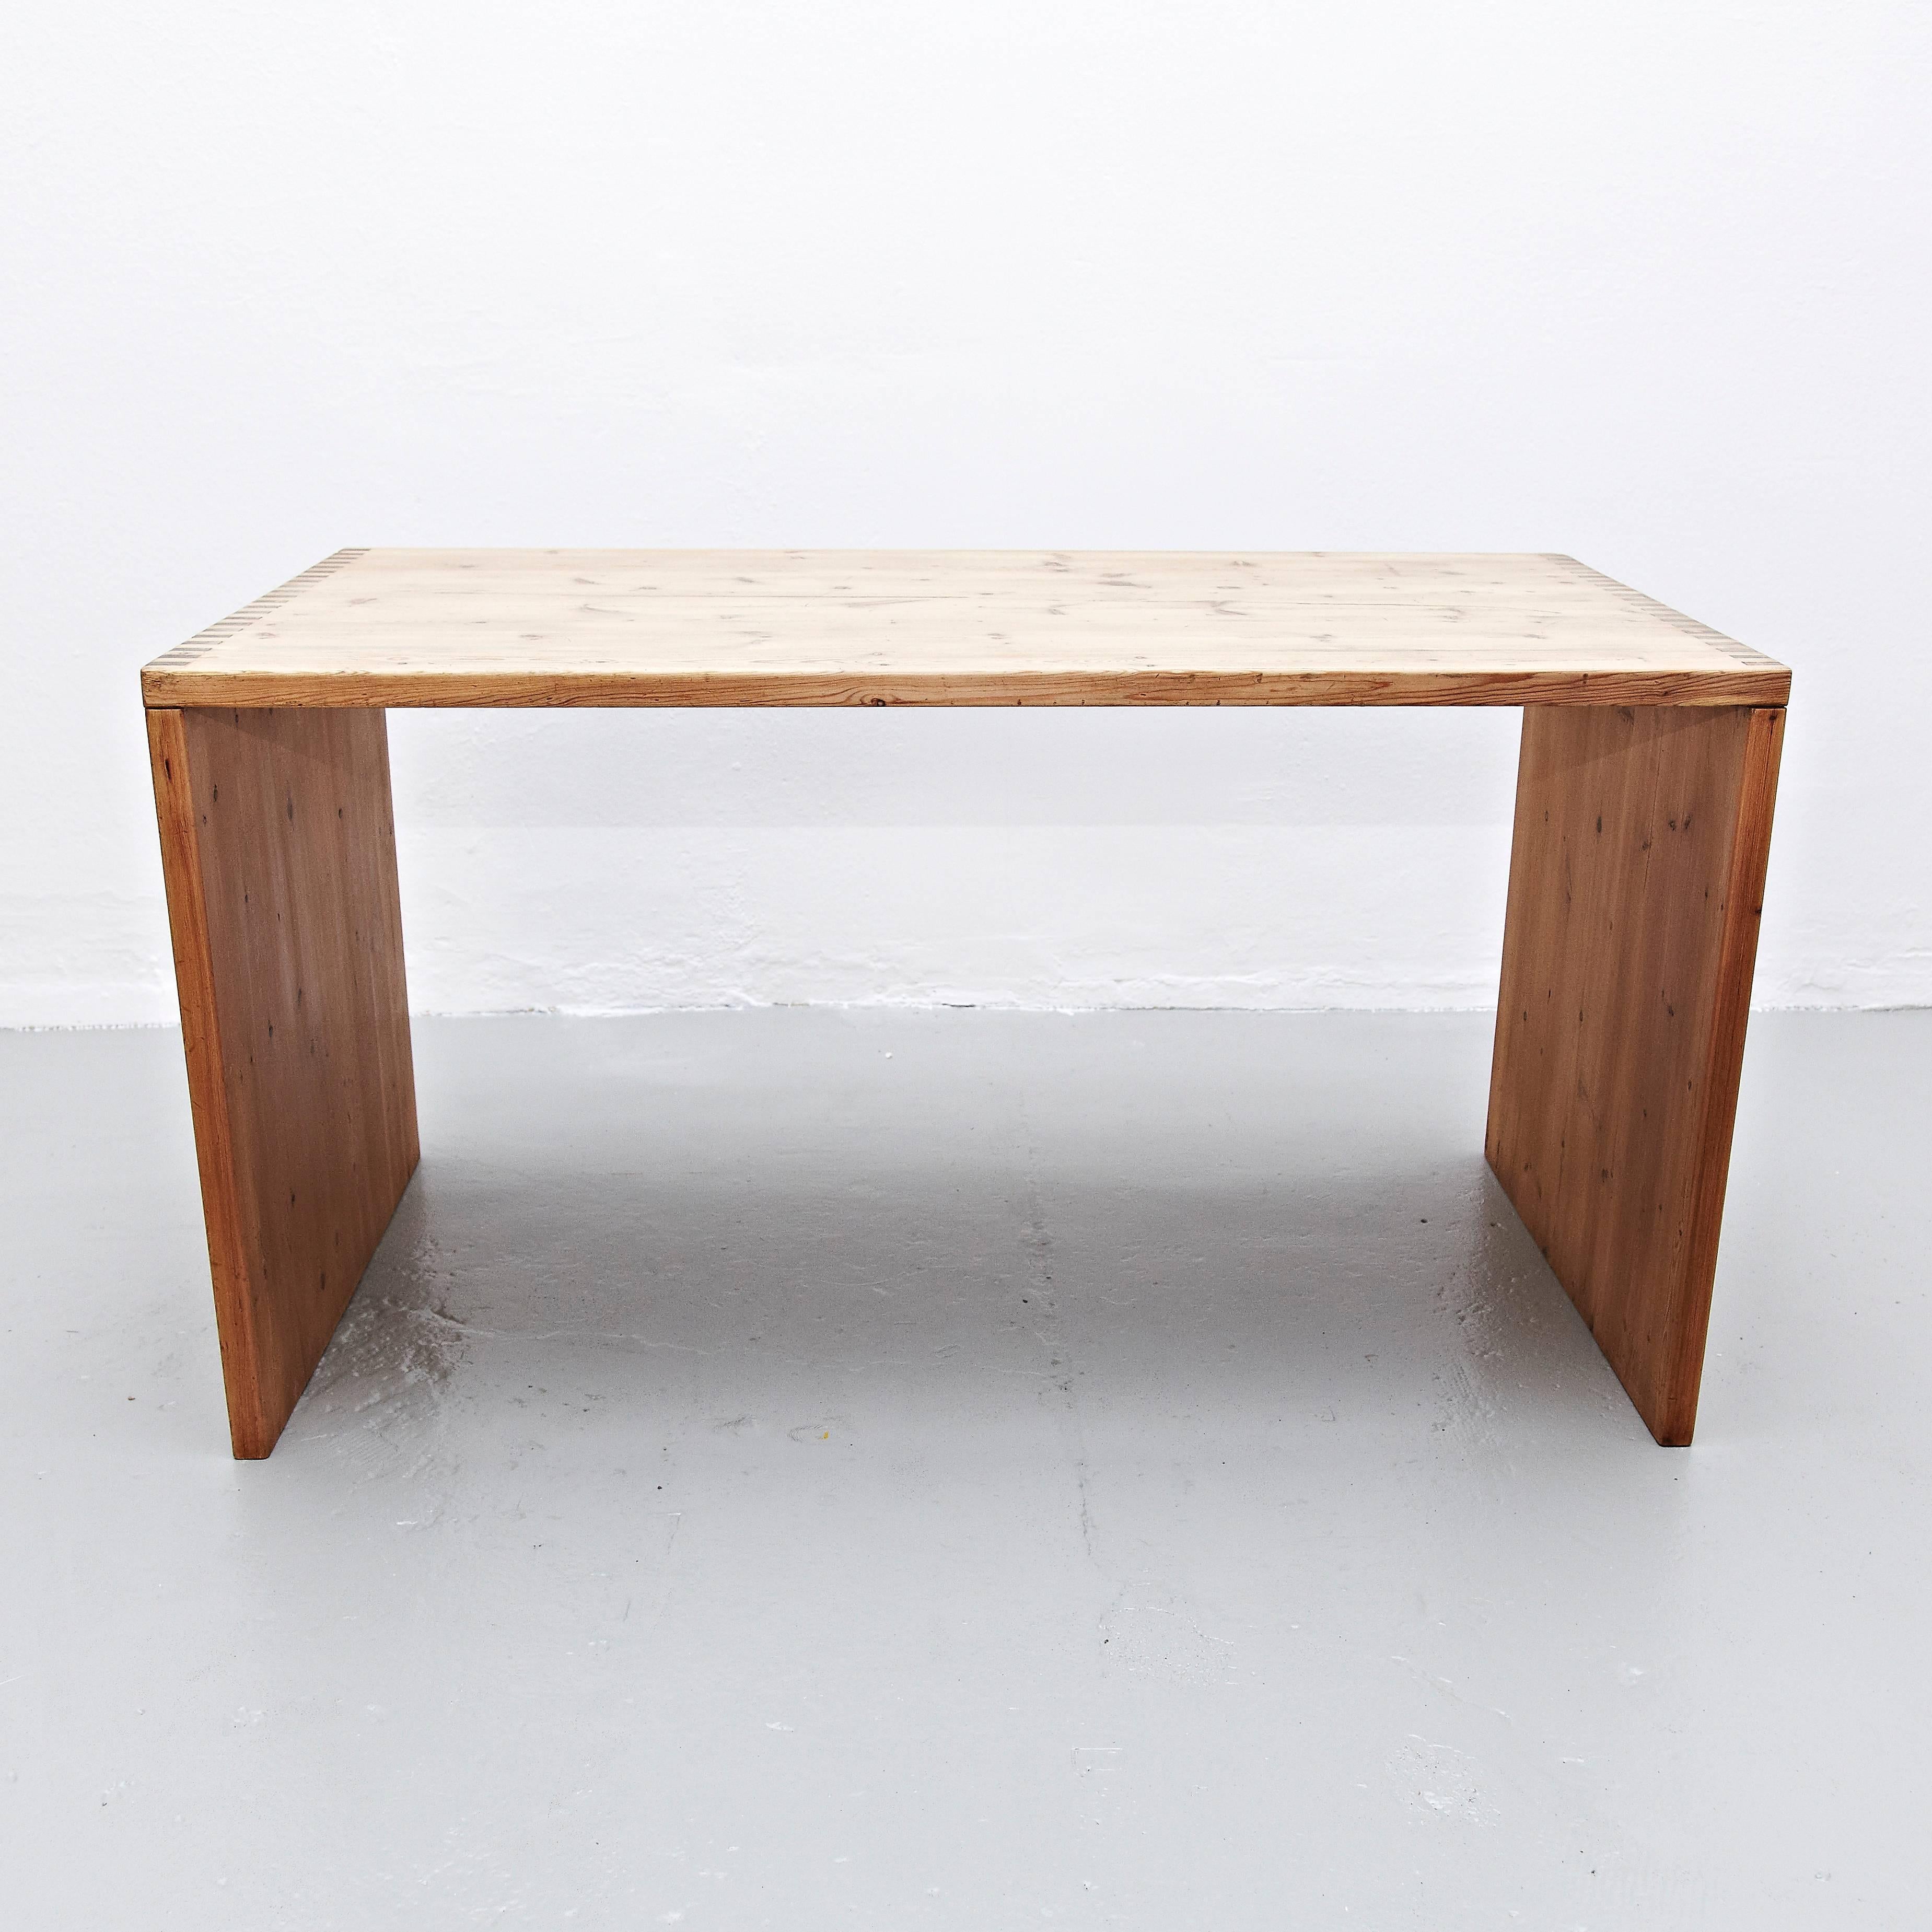 Mid-20th Century French Mid Century Modern Rational Wood Dining Table, circa 1950